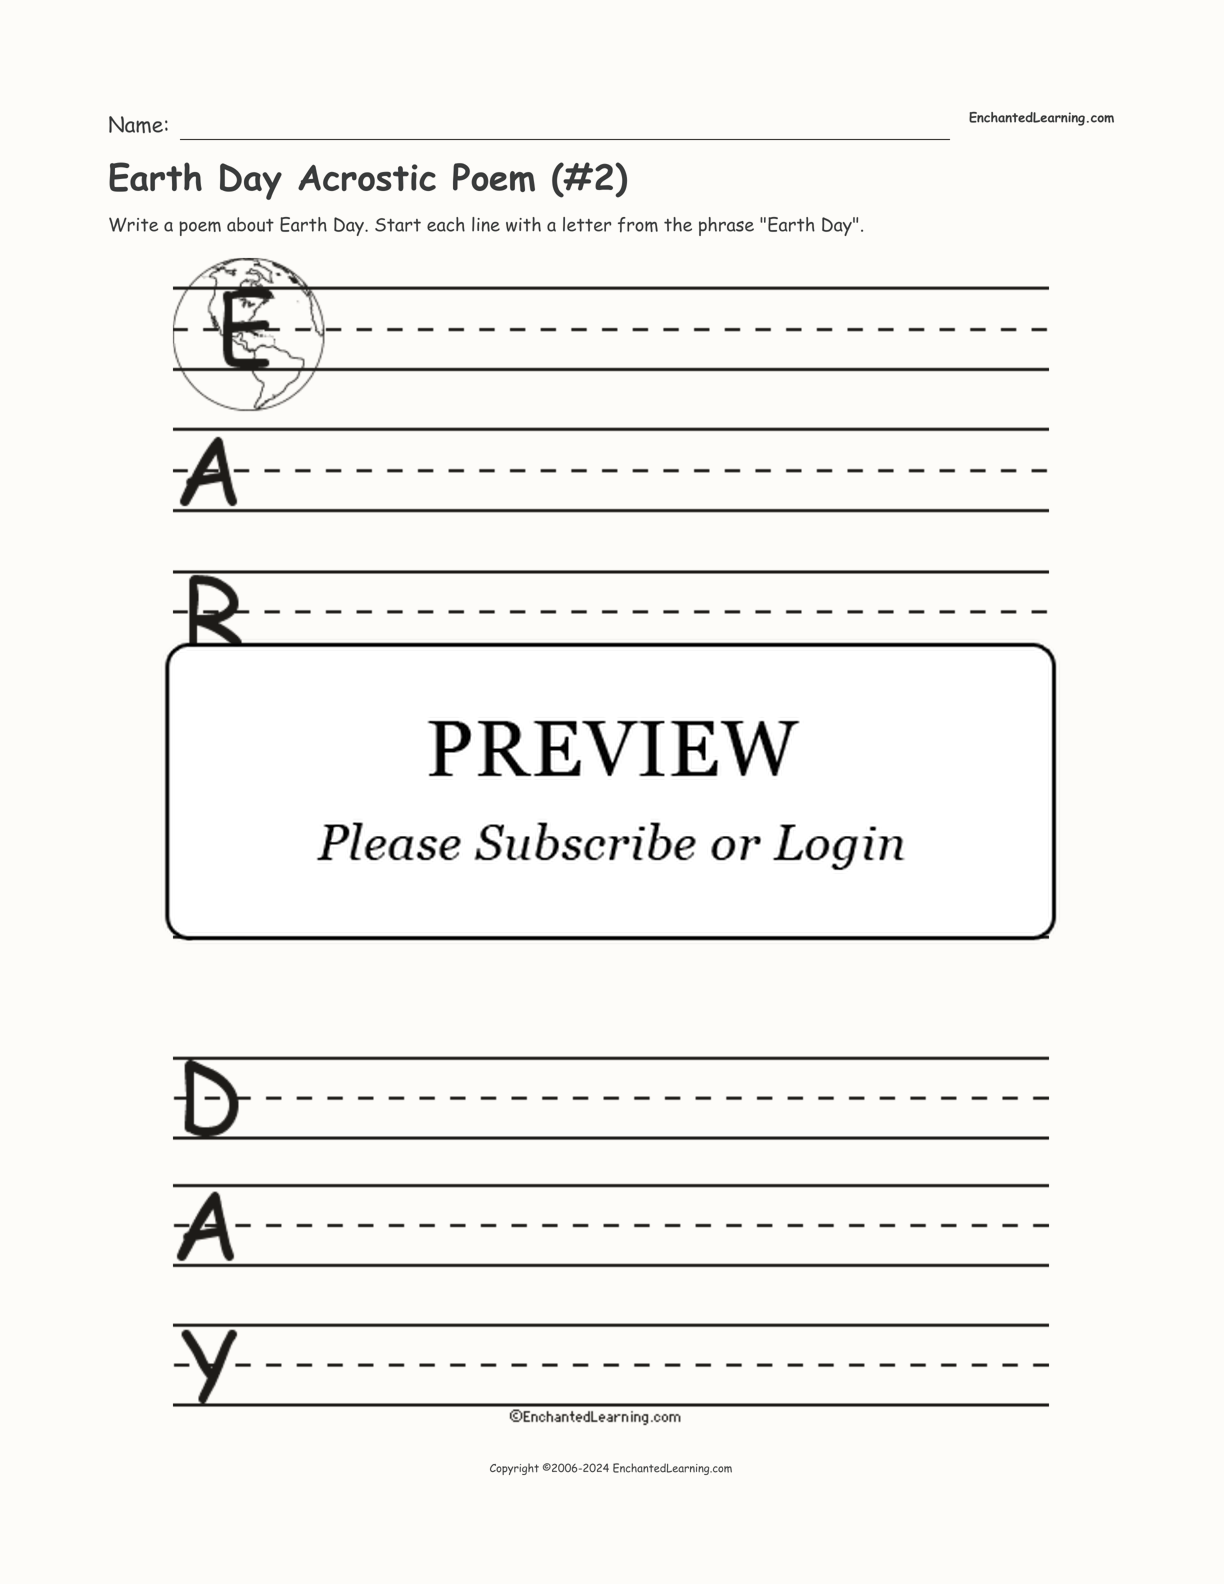 Earth Day Acrostic Poem (#2) interactive worksheet page 1